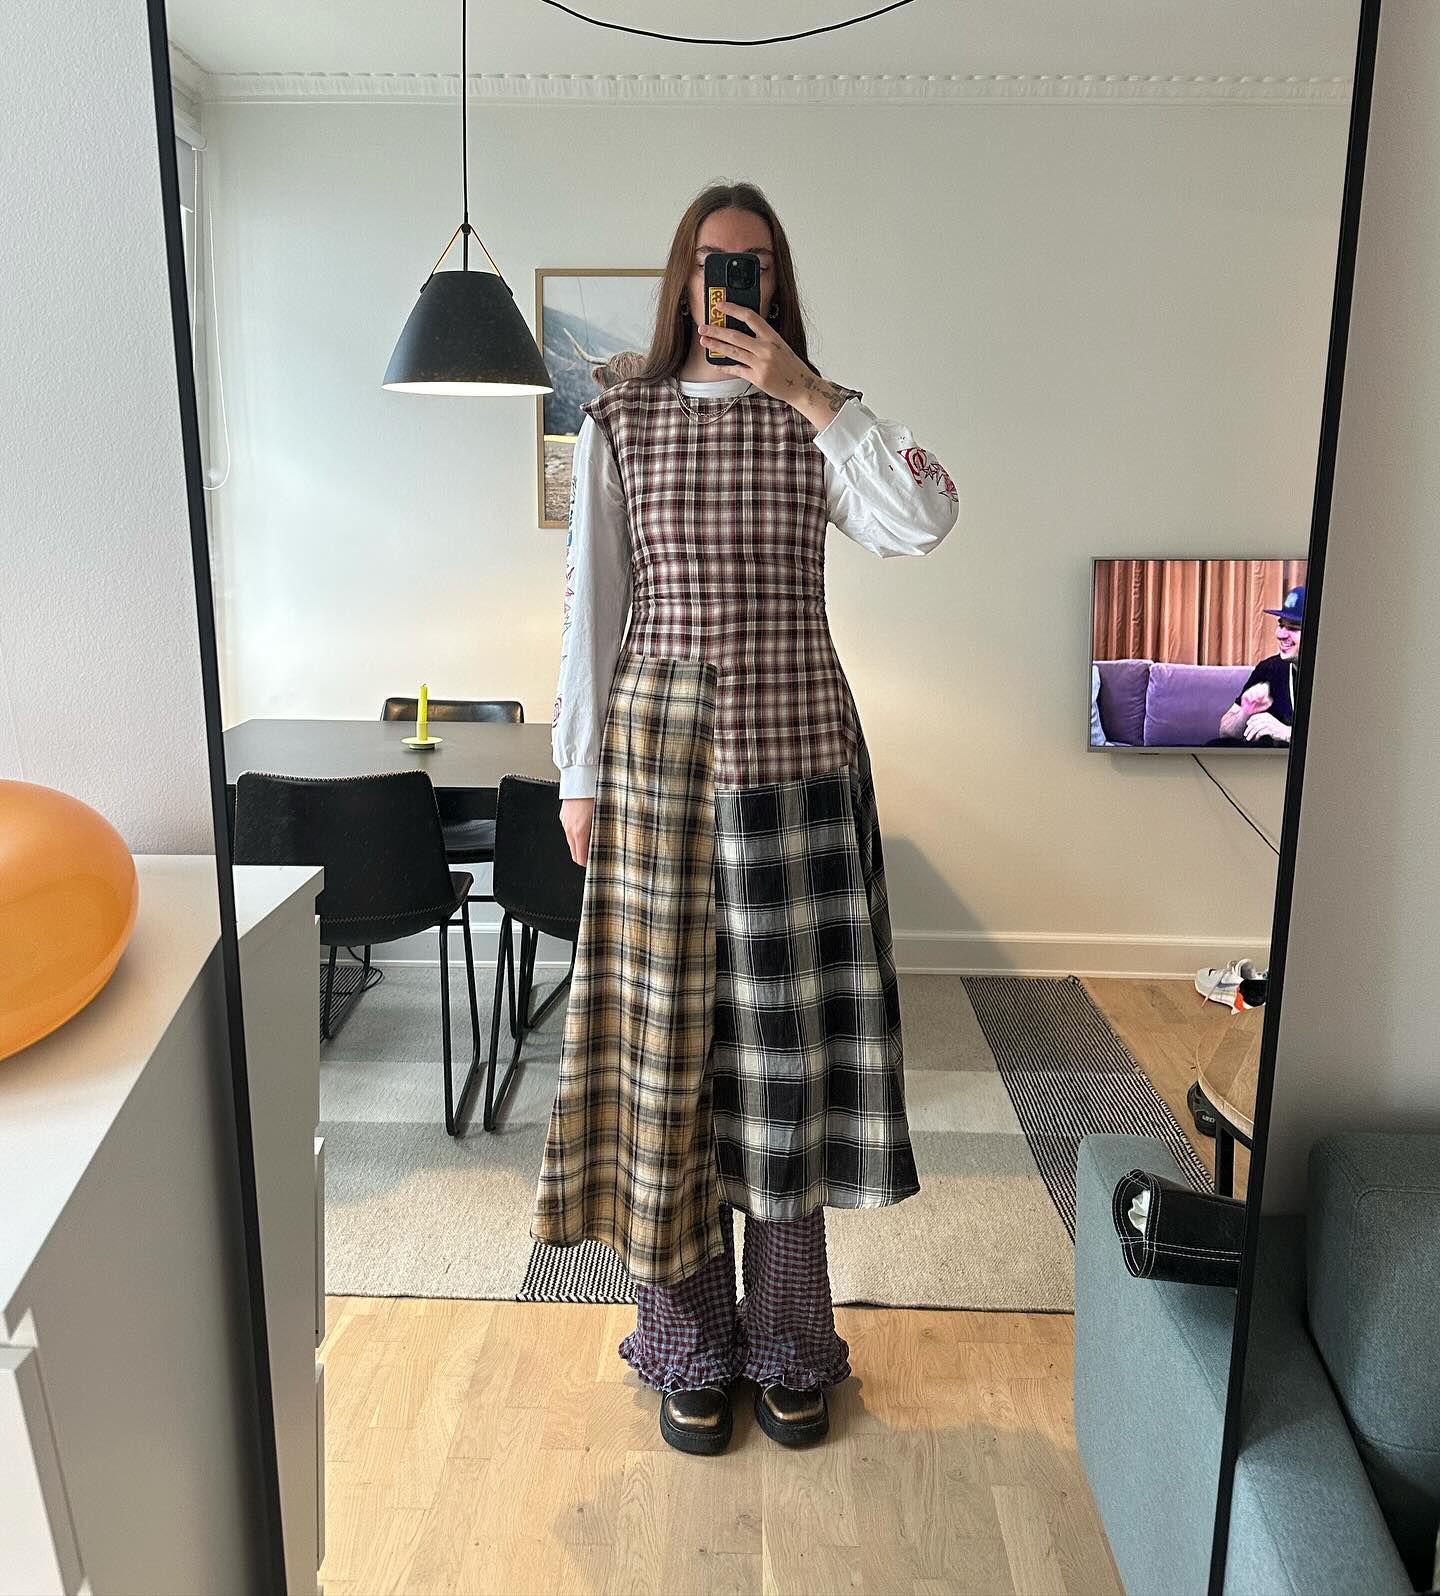 woman wearing a checked dress over trousers